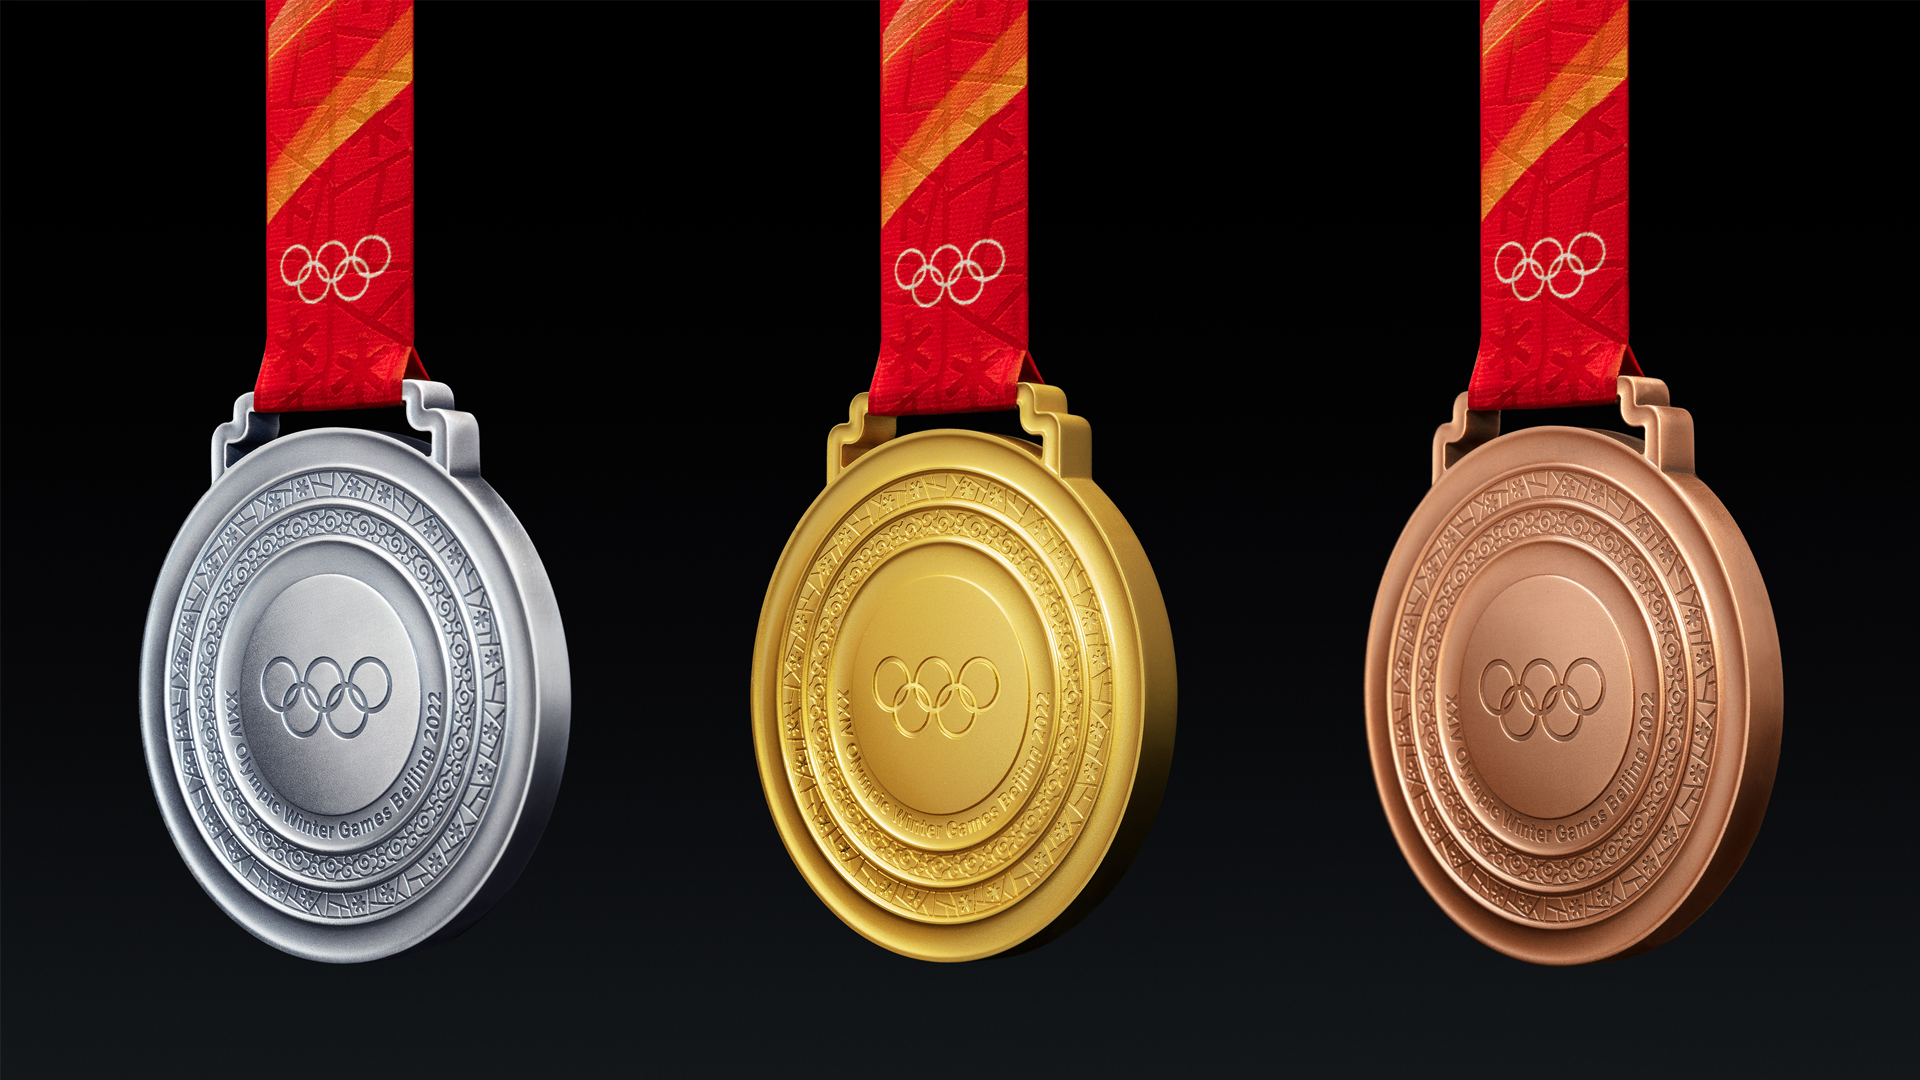 Gold medal Stock Photos, Royalty Free Gold medal Images | Depositphotos